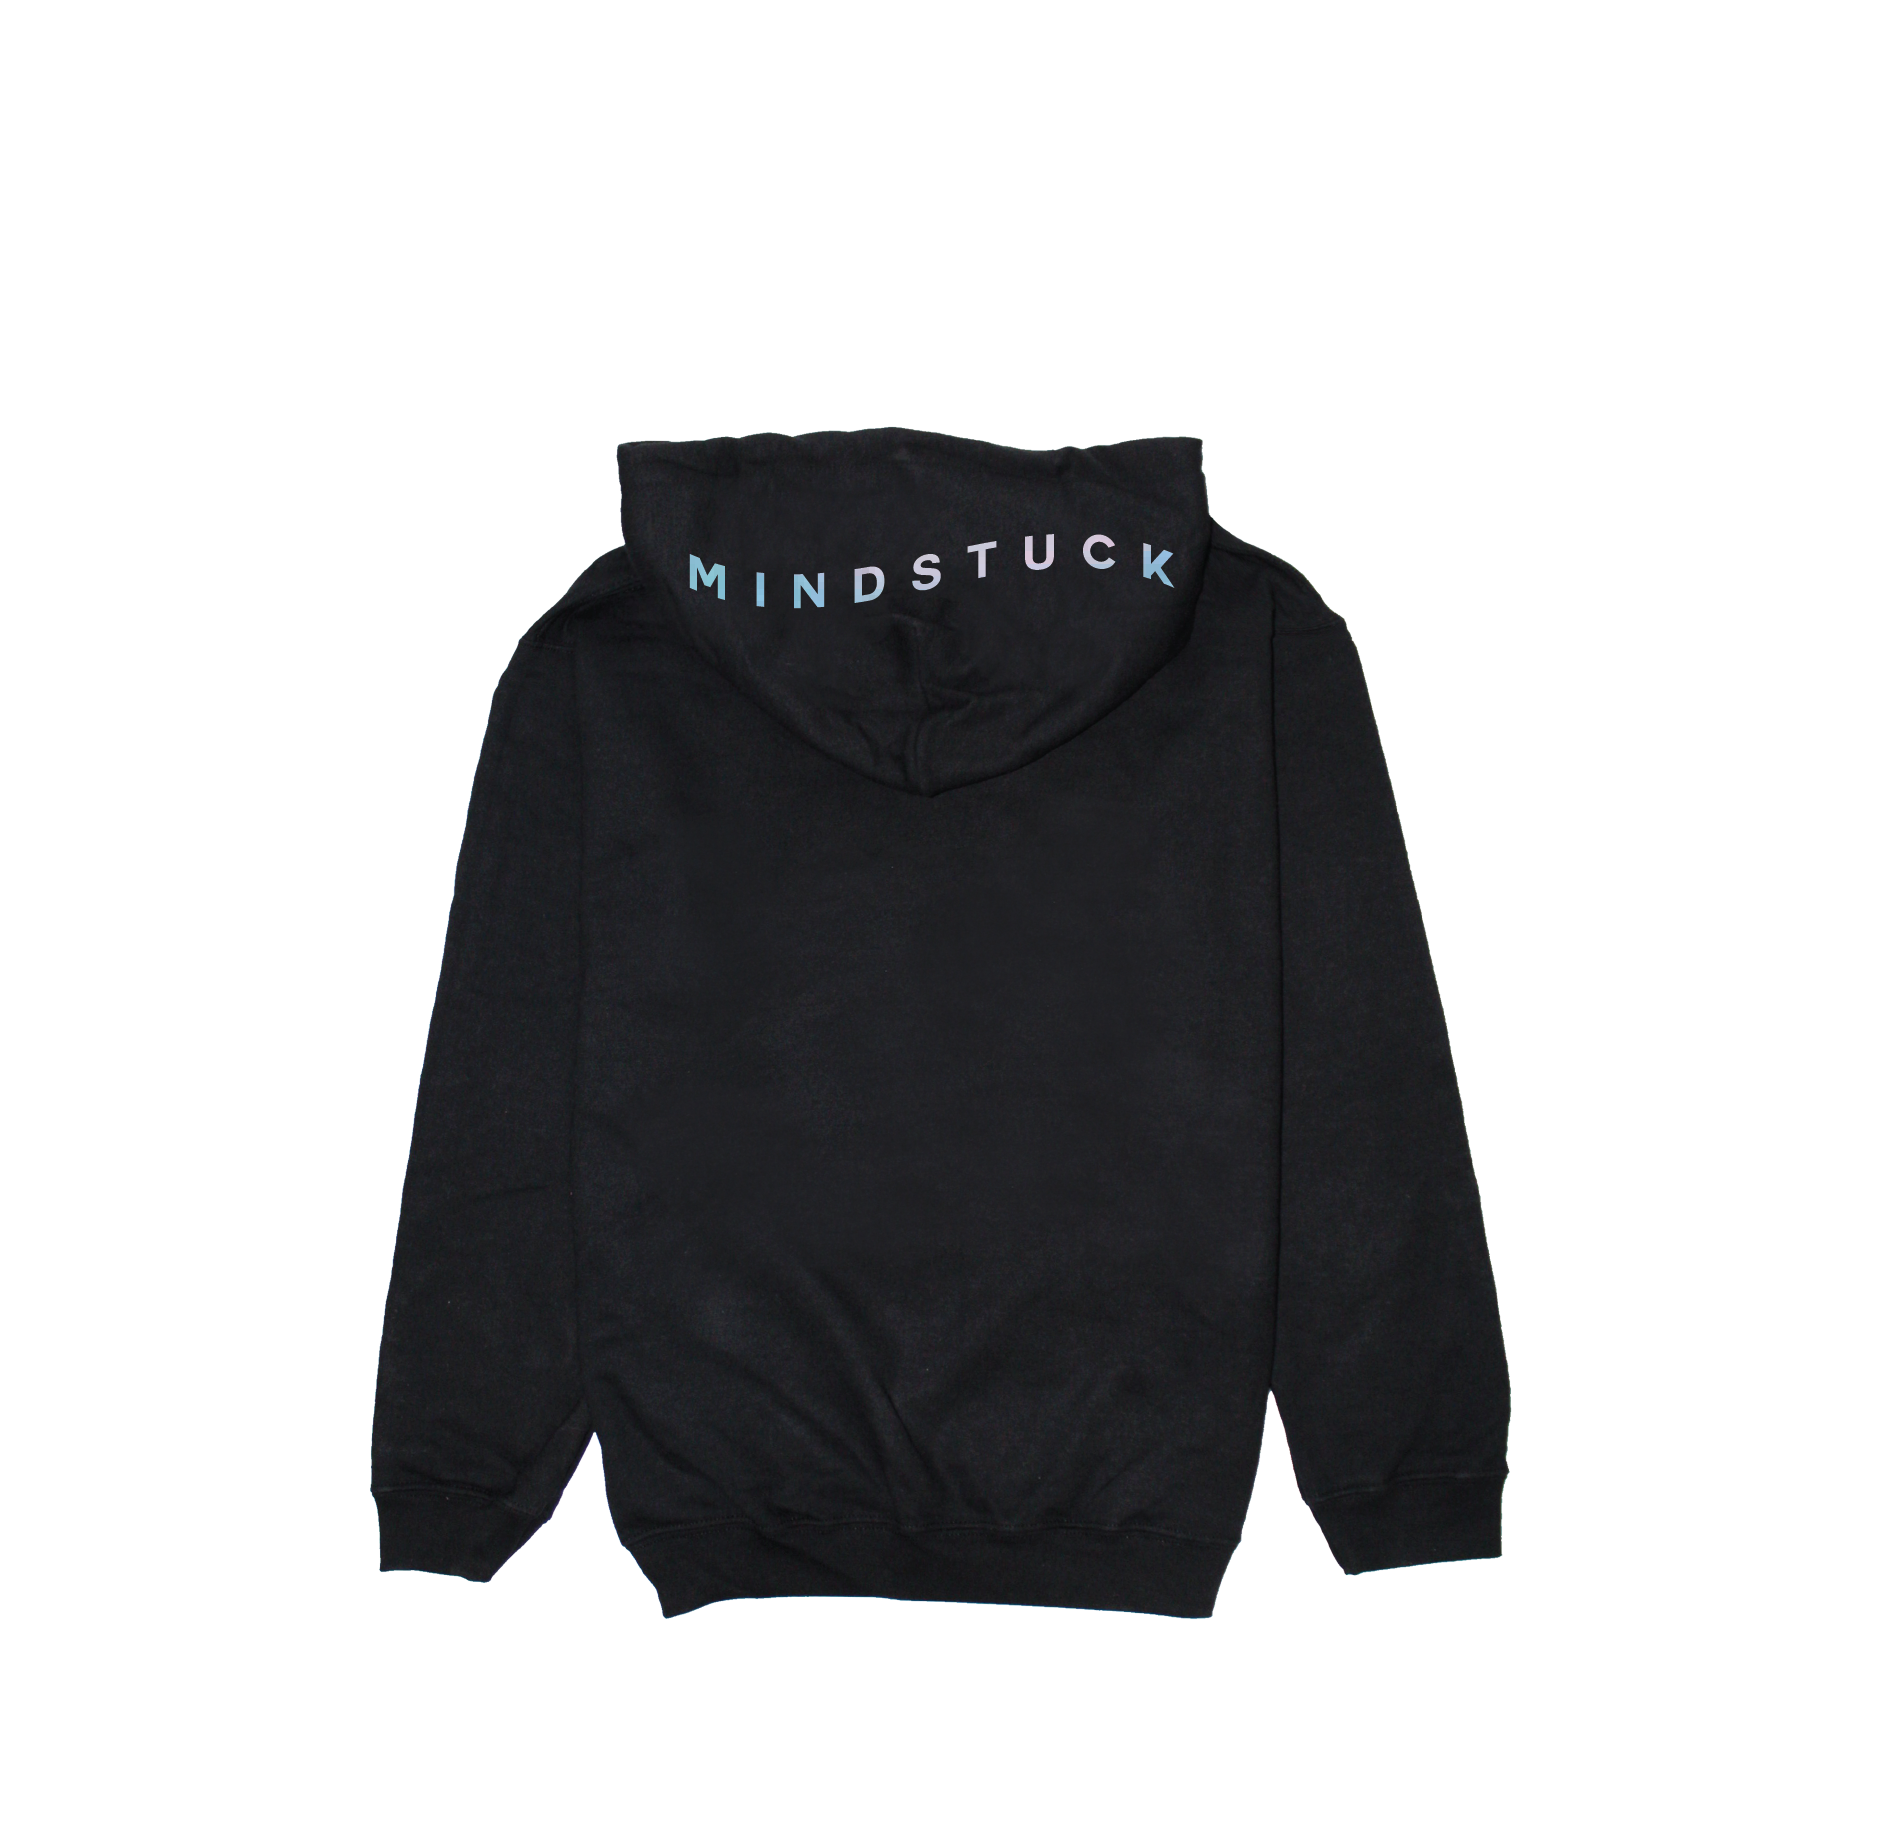 MDS Holographic - Hoodies